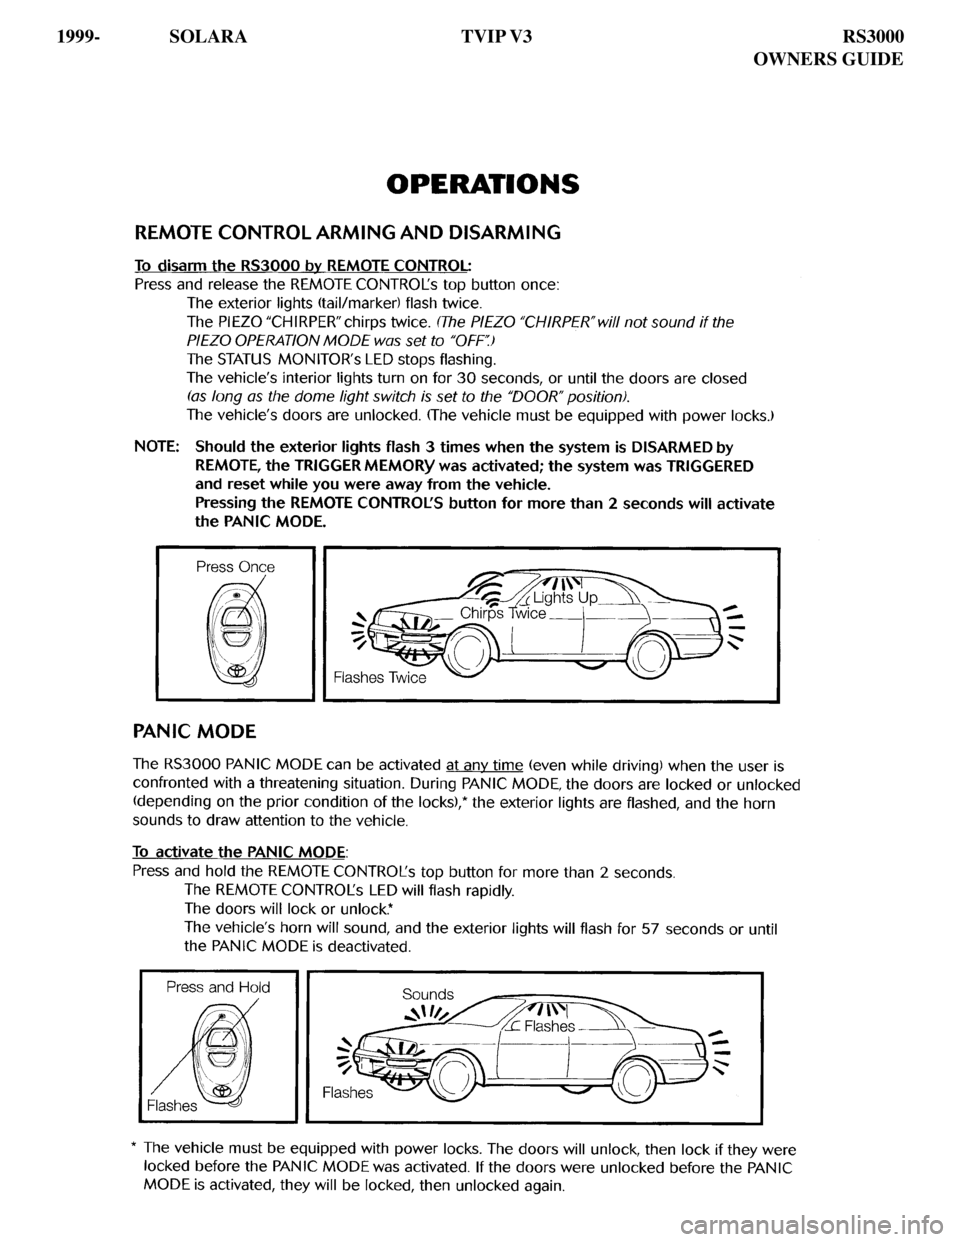 TOYOTA SOLARA 2000  Accessories, Audio & Navigation (in English) 
1999-  SOLARA TVIP V3            RS3000
      OWNERS GUIDE 